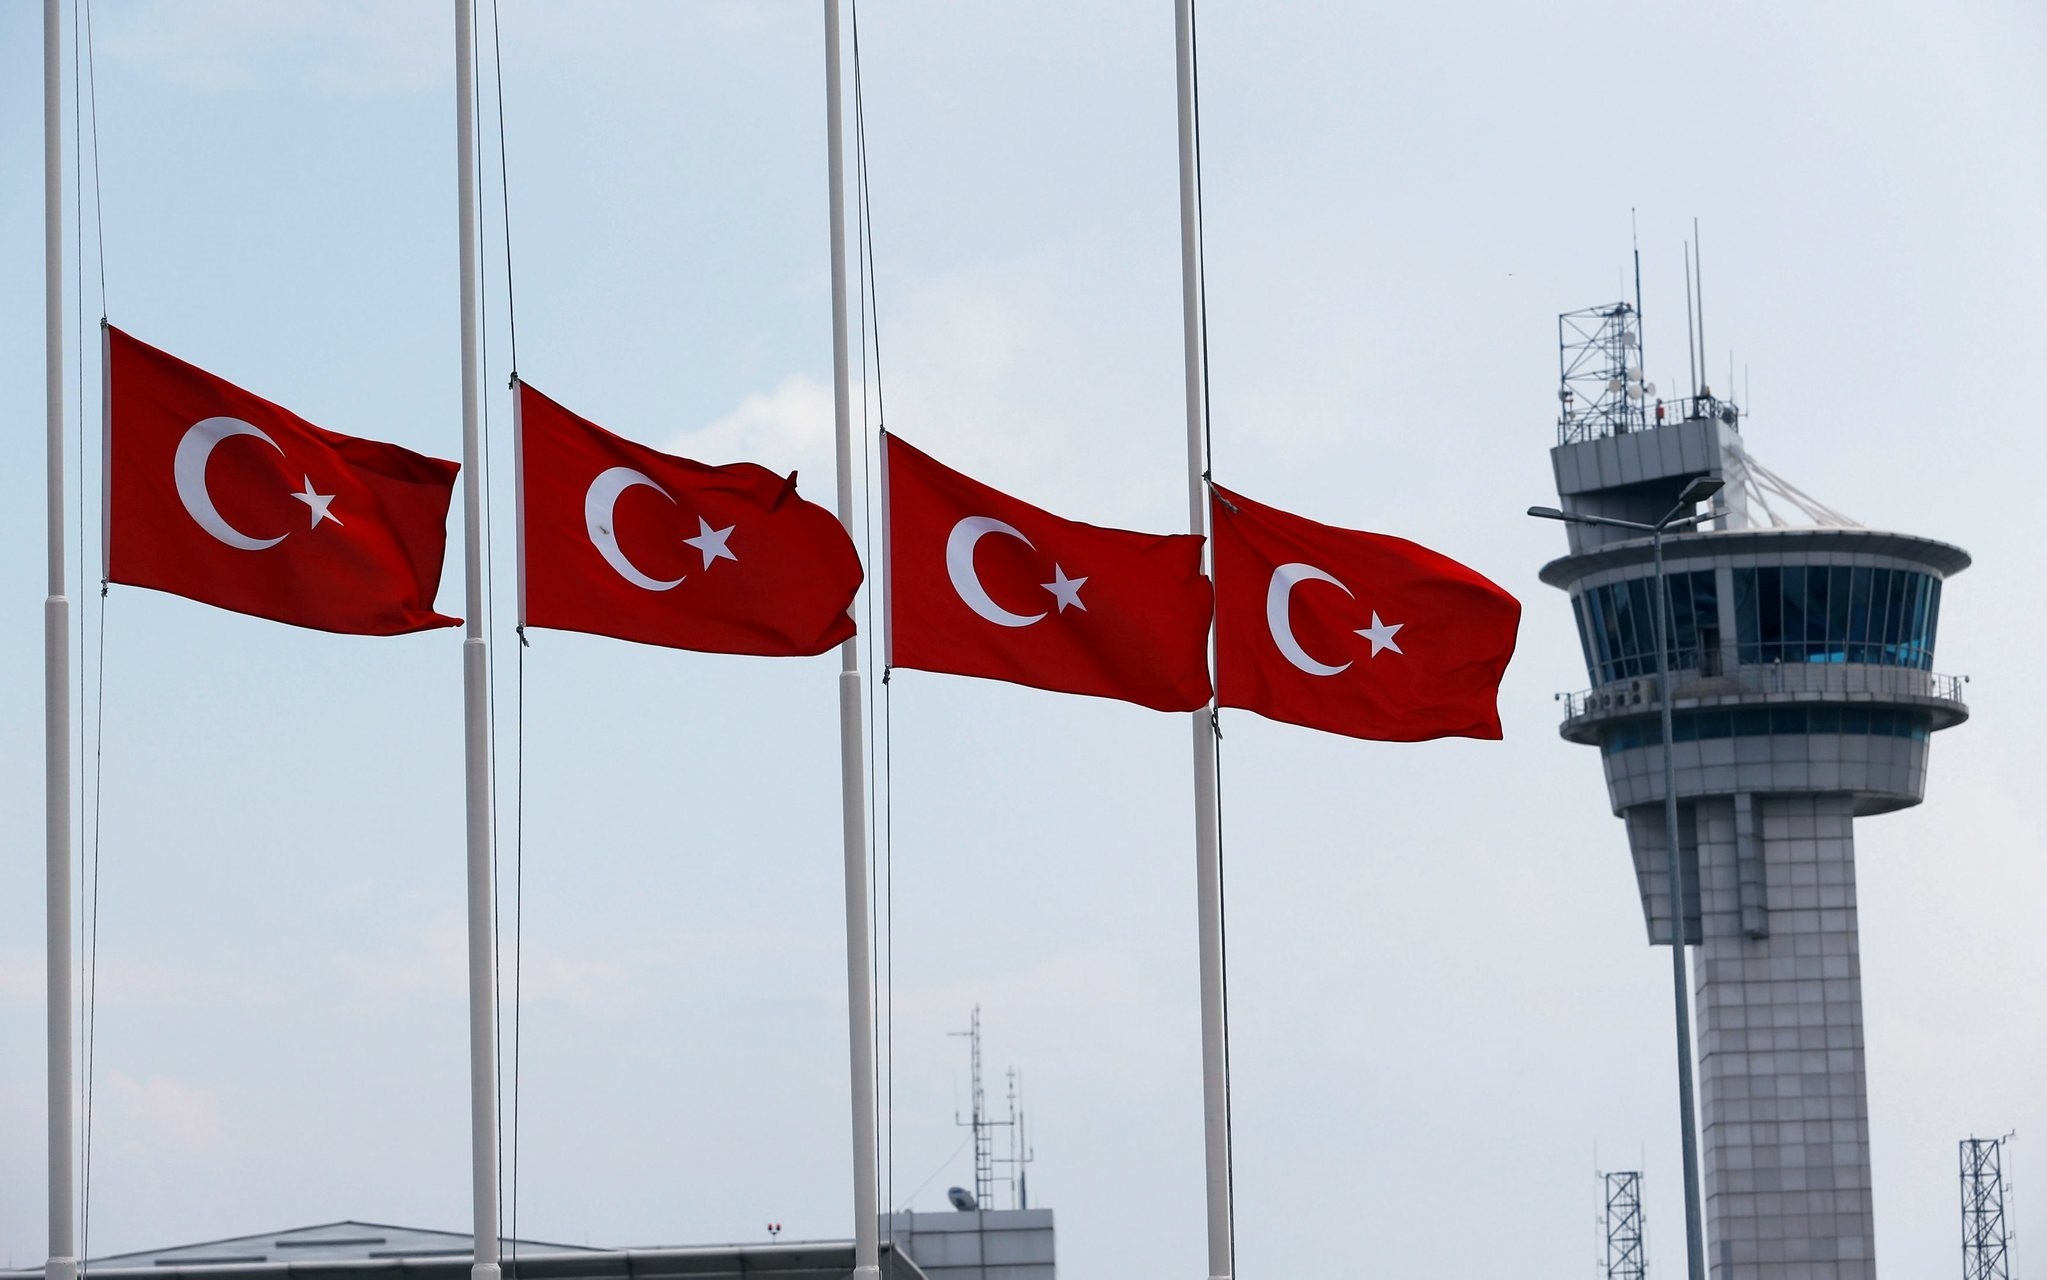 Turkish flags, with the control tower in the background, fly at half mast at the country's largest airport, Istanbul Atatu00fcrk, following the June attack there. (Reuters Photo)